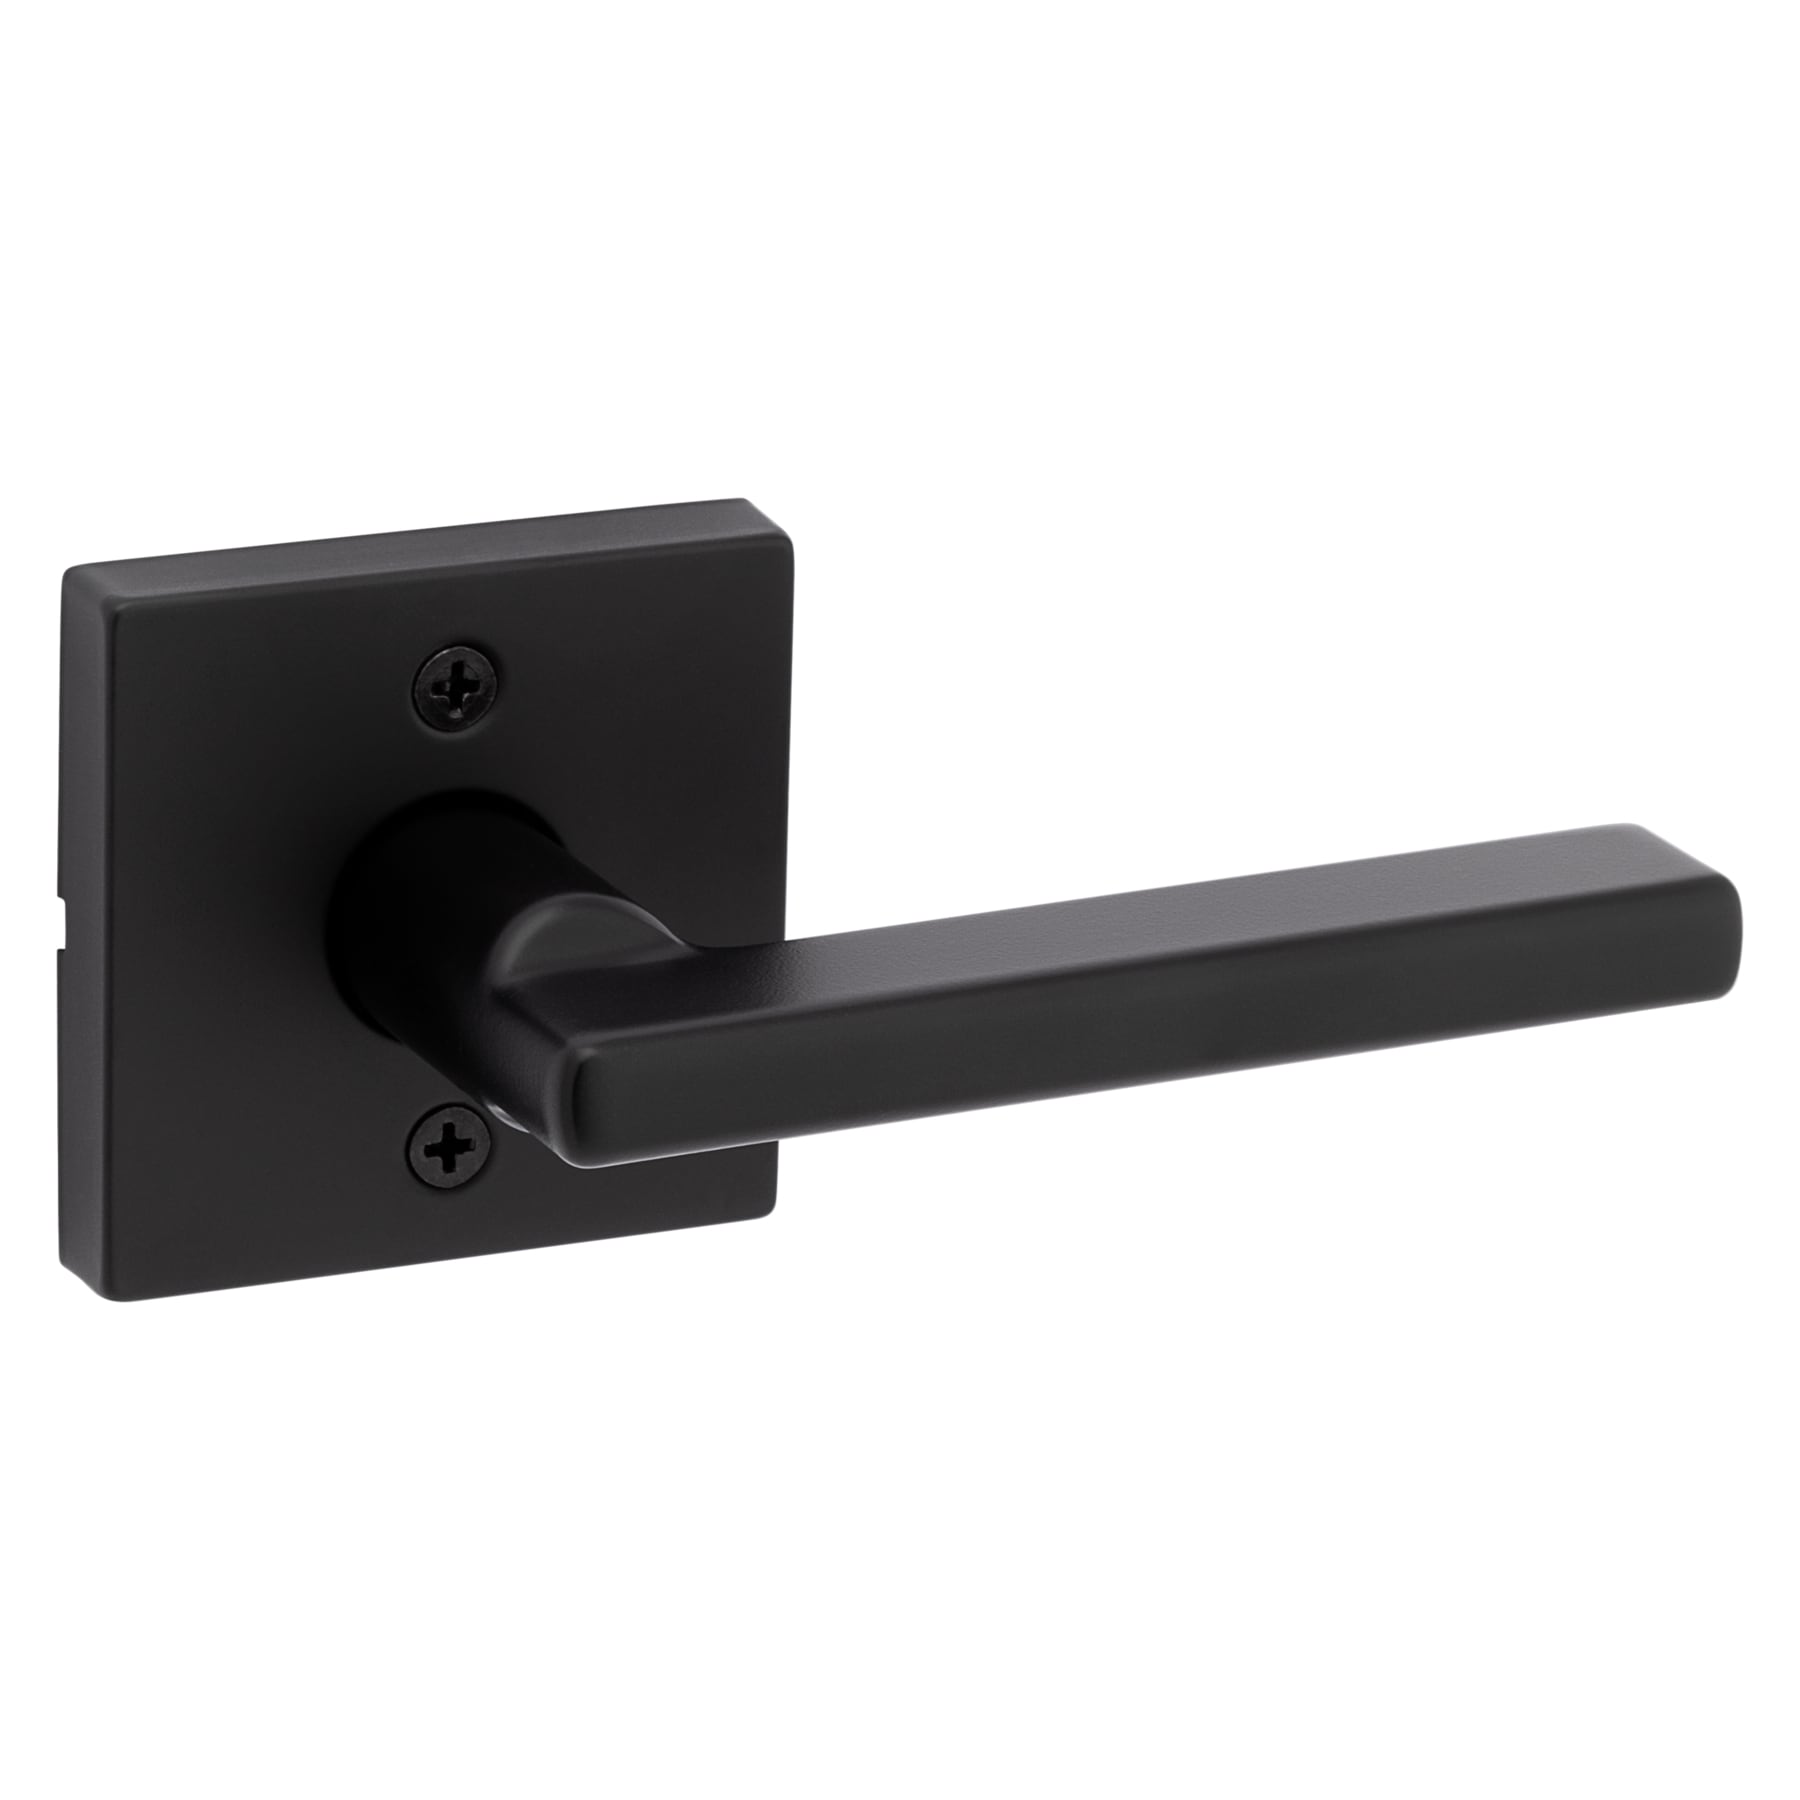 Forge Locks Olympic Passage Door Handle - Polished Brass